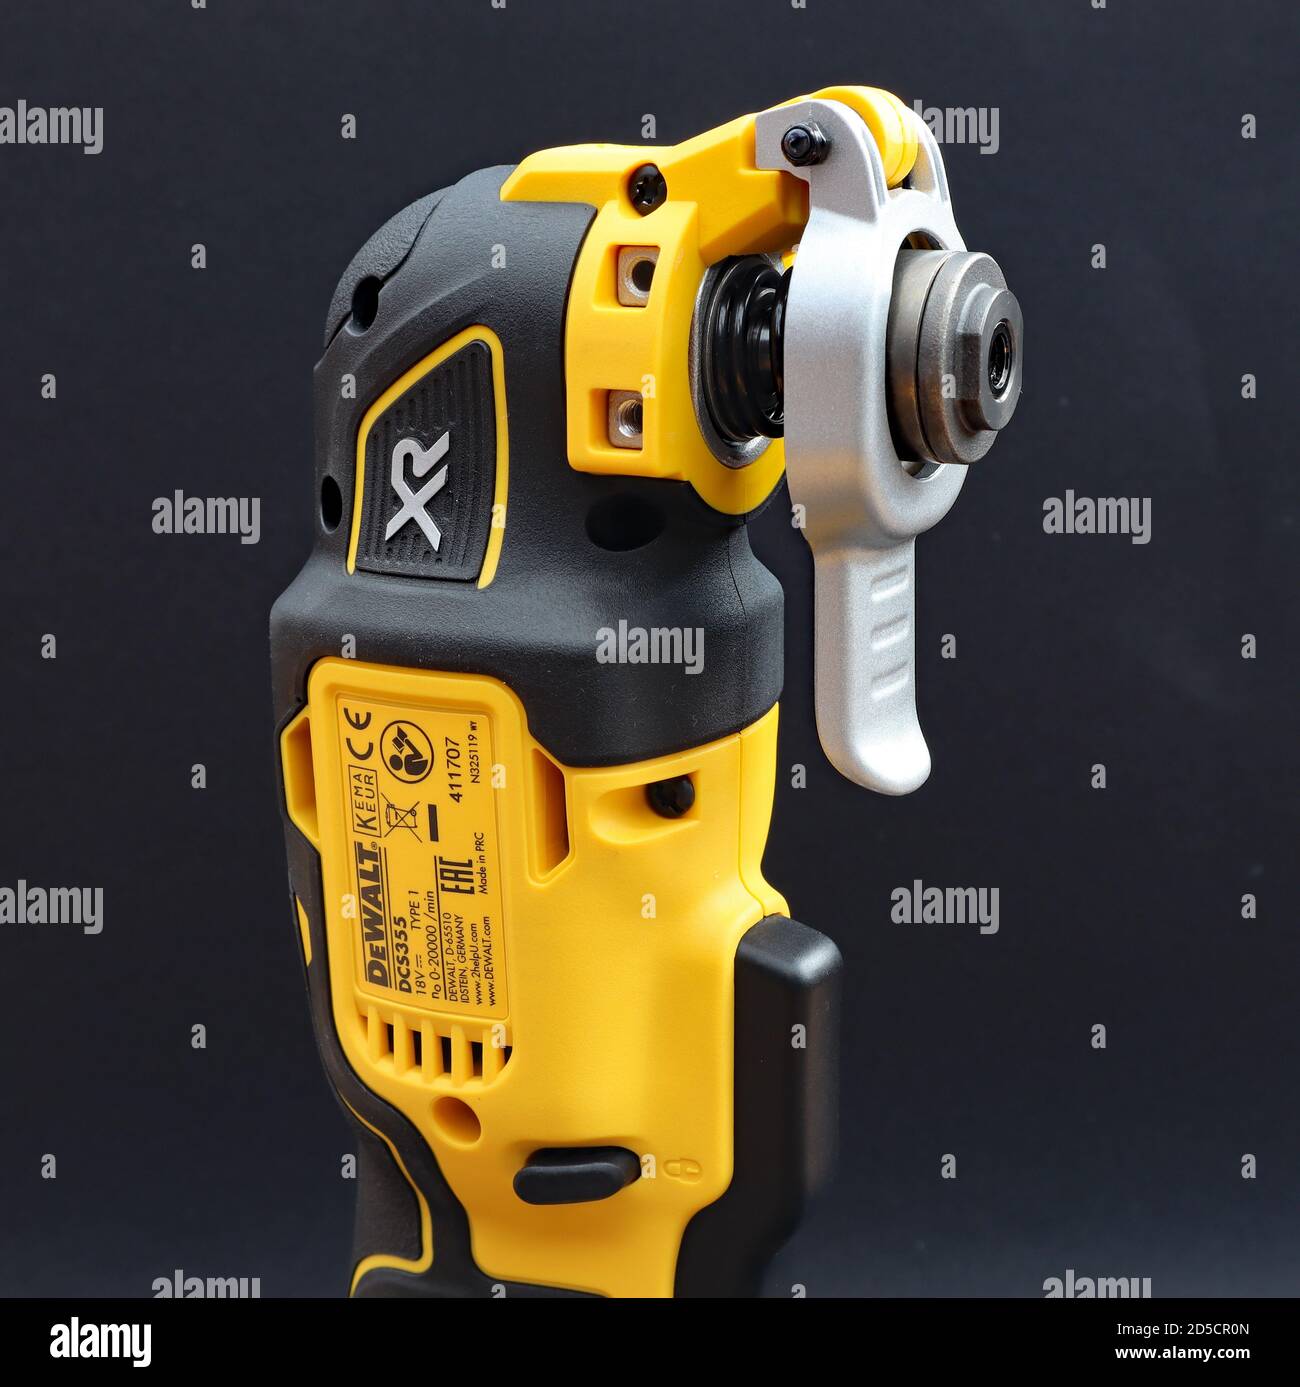 OTTERY ST MARY, DEVON - FEBRUARY 6TH 2020: Dewalt Cordless Multi Tool  stands upright on its battery on a black background Stock Photo - Alamy